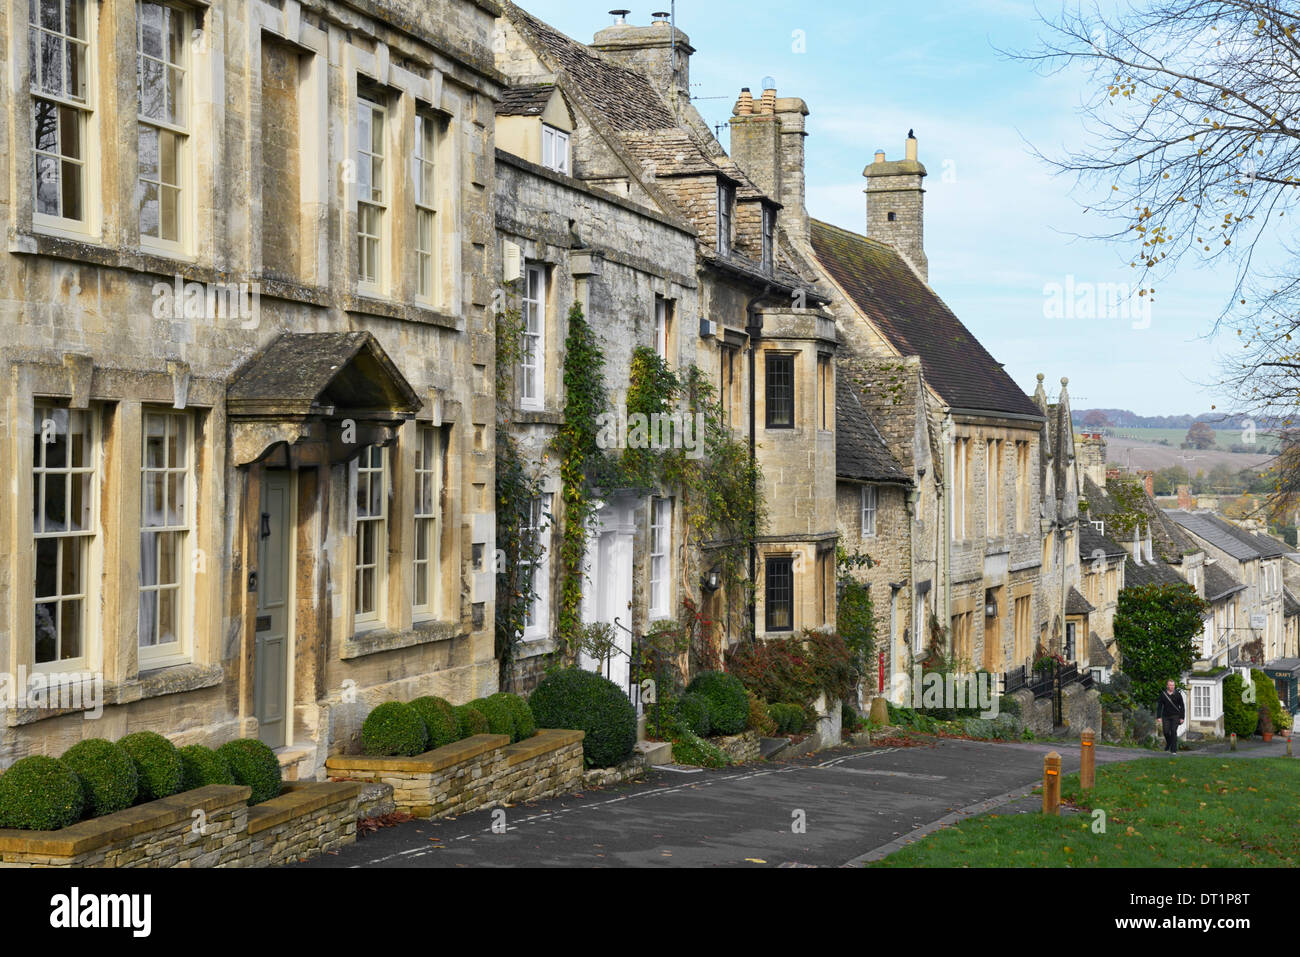 Cotswold cottages along The Hill, Burford, Cotswolds, Oxfordshire, England, United Kingdom, Europe Stock Photo